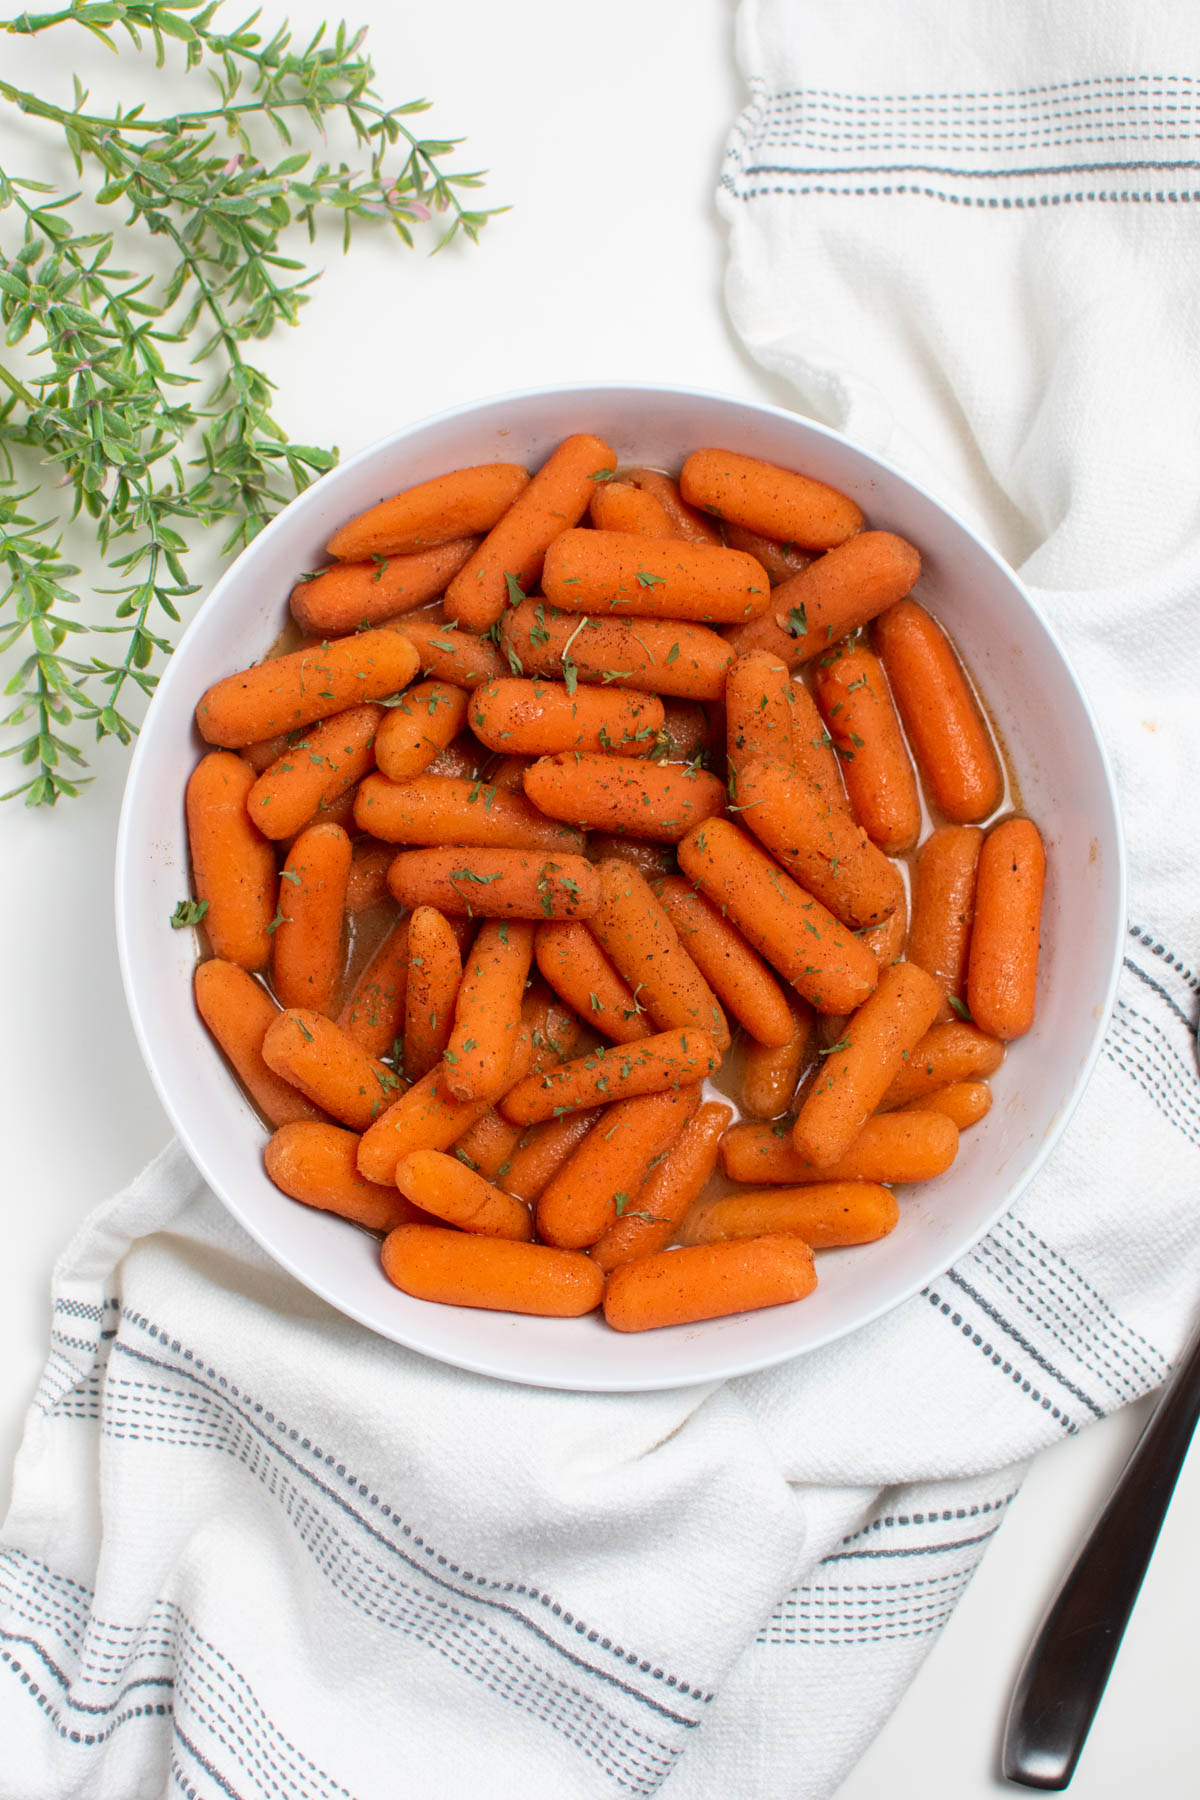 Brown sugar and honey glazed carrots in white bowl next to white towel and faux green stems.